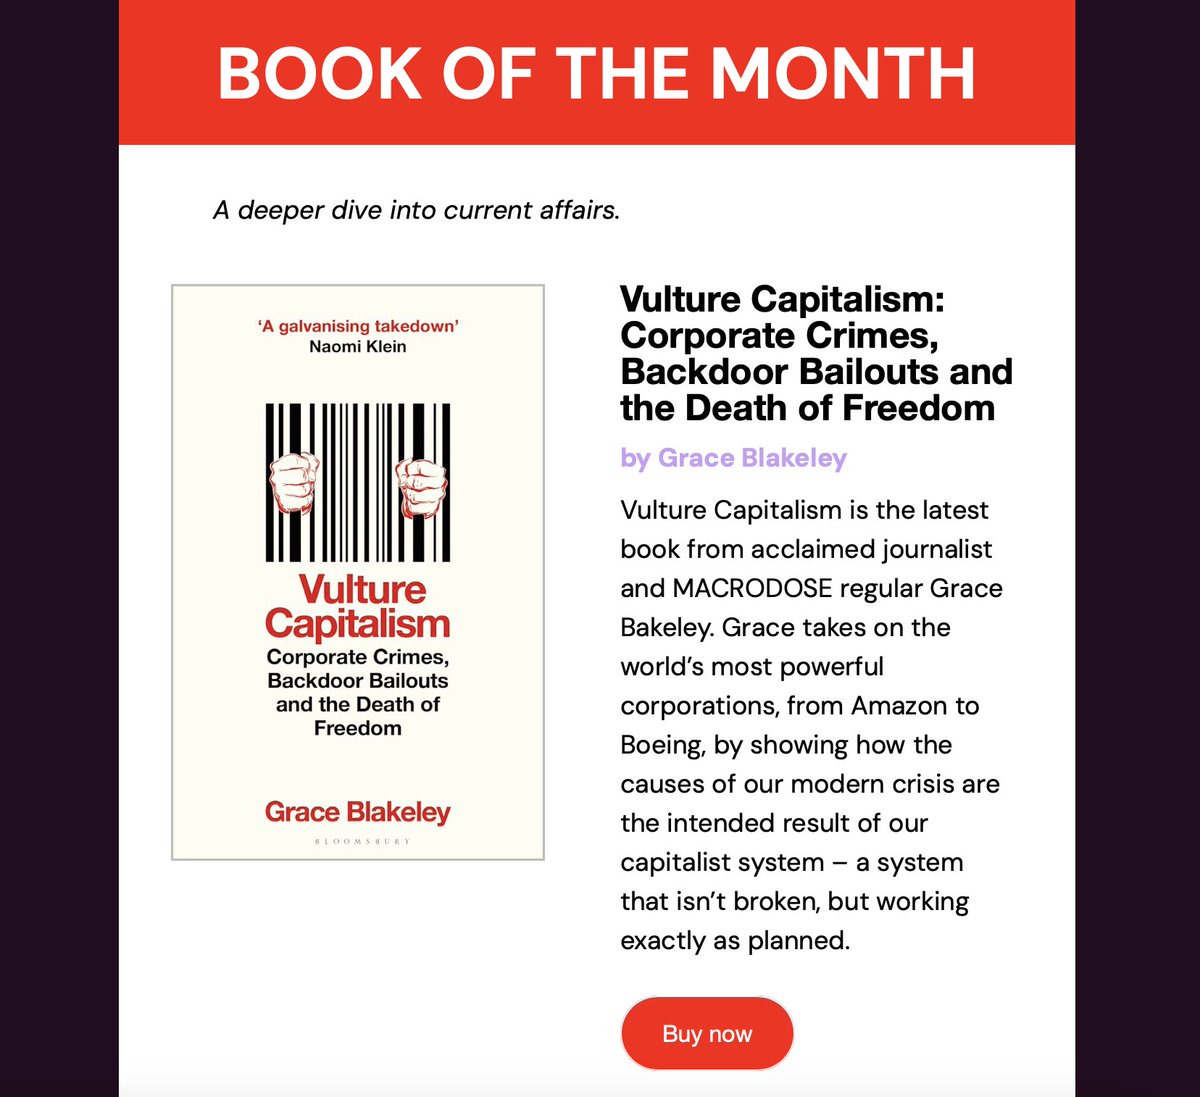 Grace takes on the world’s most powerful corporations by showing how the causes of our modern crisis are the intended result of our capitalist system 🫰🤑 Vulture Capitalism is our MACRODOSE #bookofthemonth @graceblakeley @BloomsburyBooks